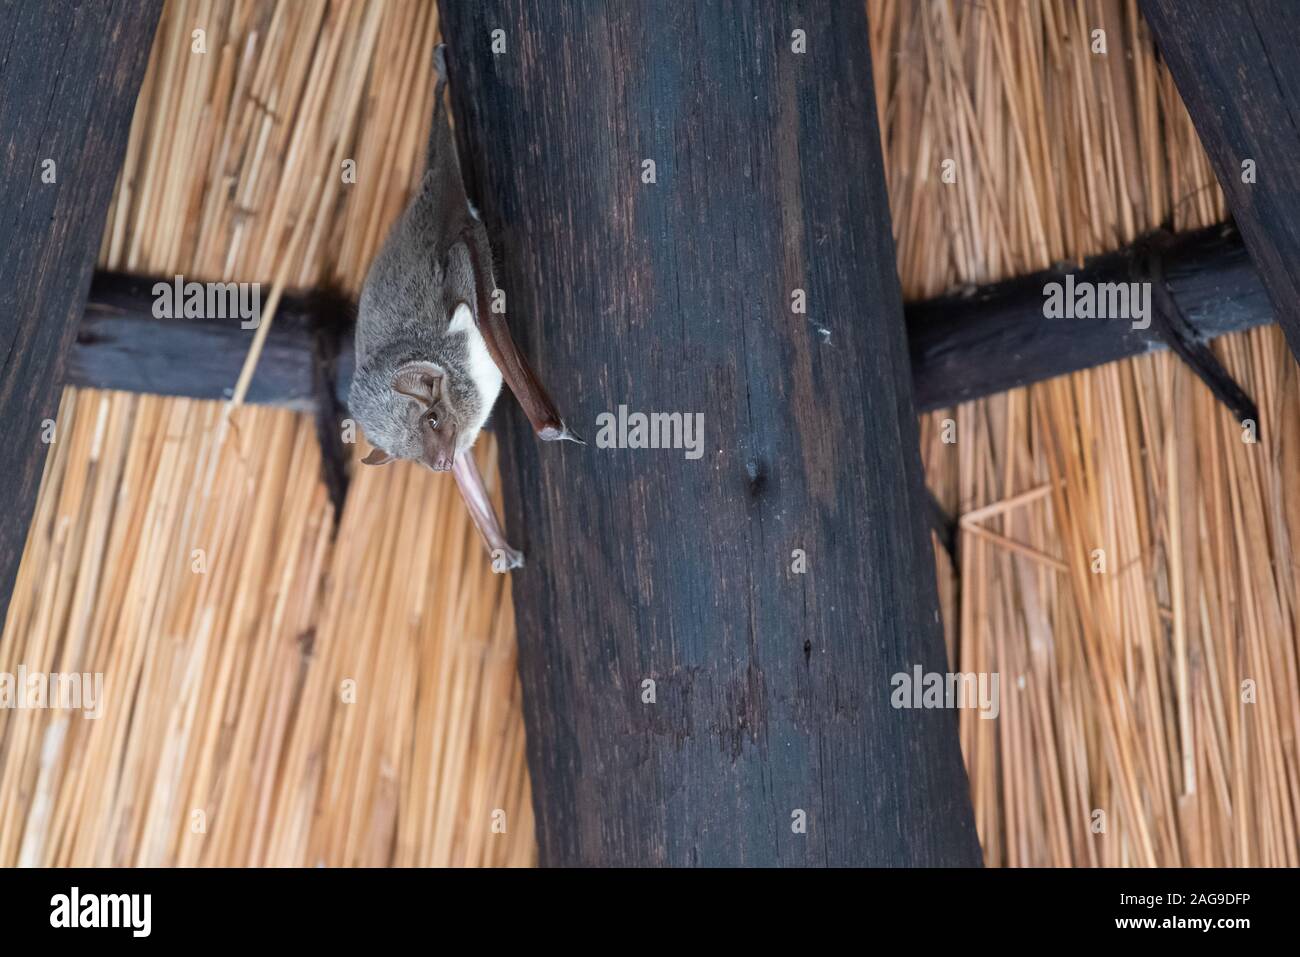 A Mauritian tomb bat - Taphozous mauritanus - hangs from the rafters of a lapa in the Afsaal picnic site in Kruger National Park, South Africa Stock Photo